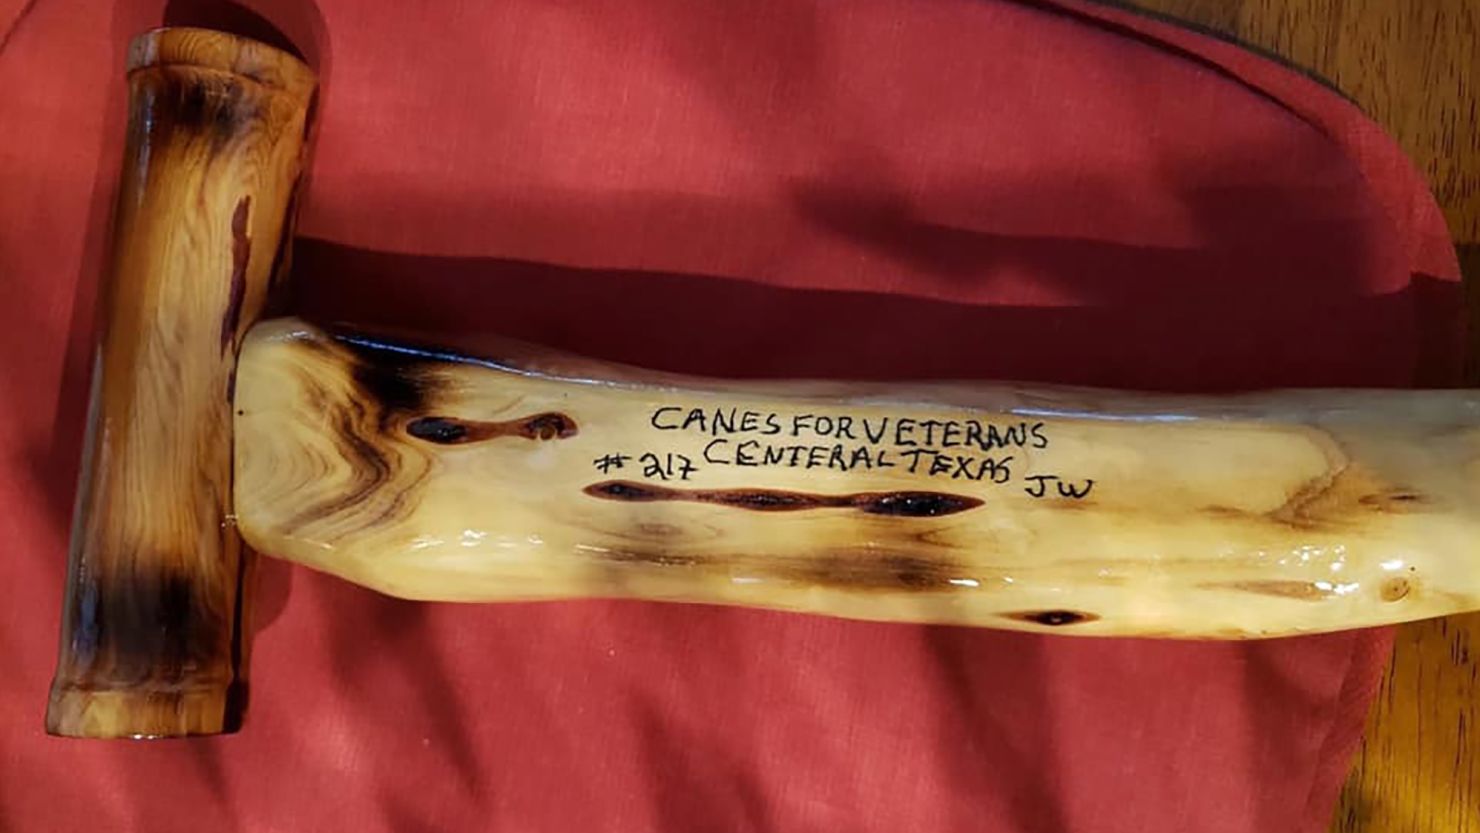 A cane made by Canes for Veterans Central Texas, a branch of the Florida-based non-profit Free Canes For Veterans.